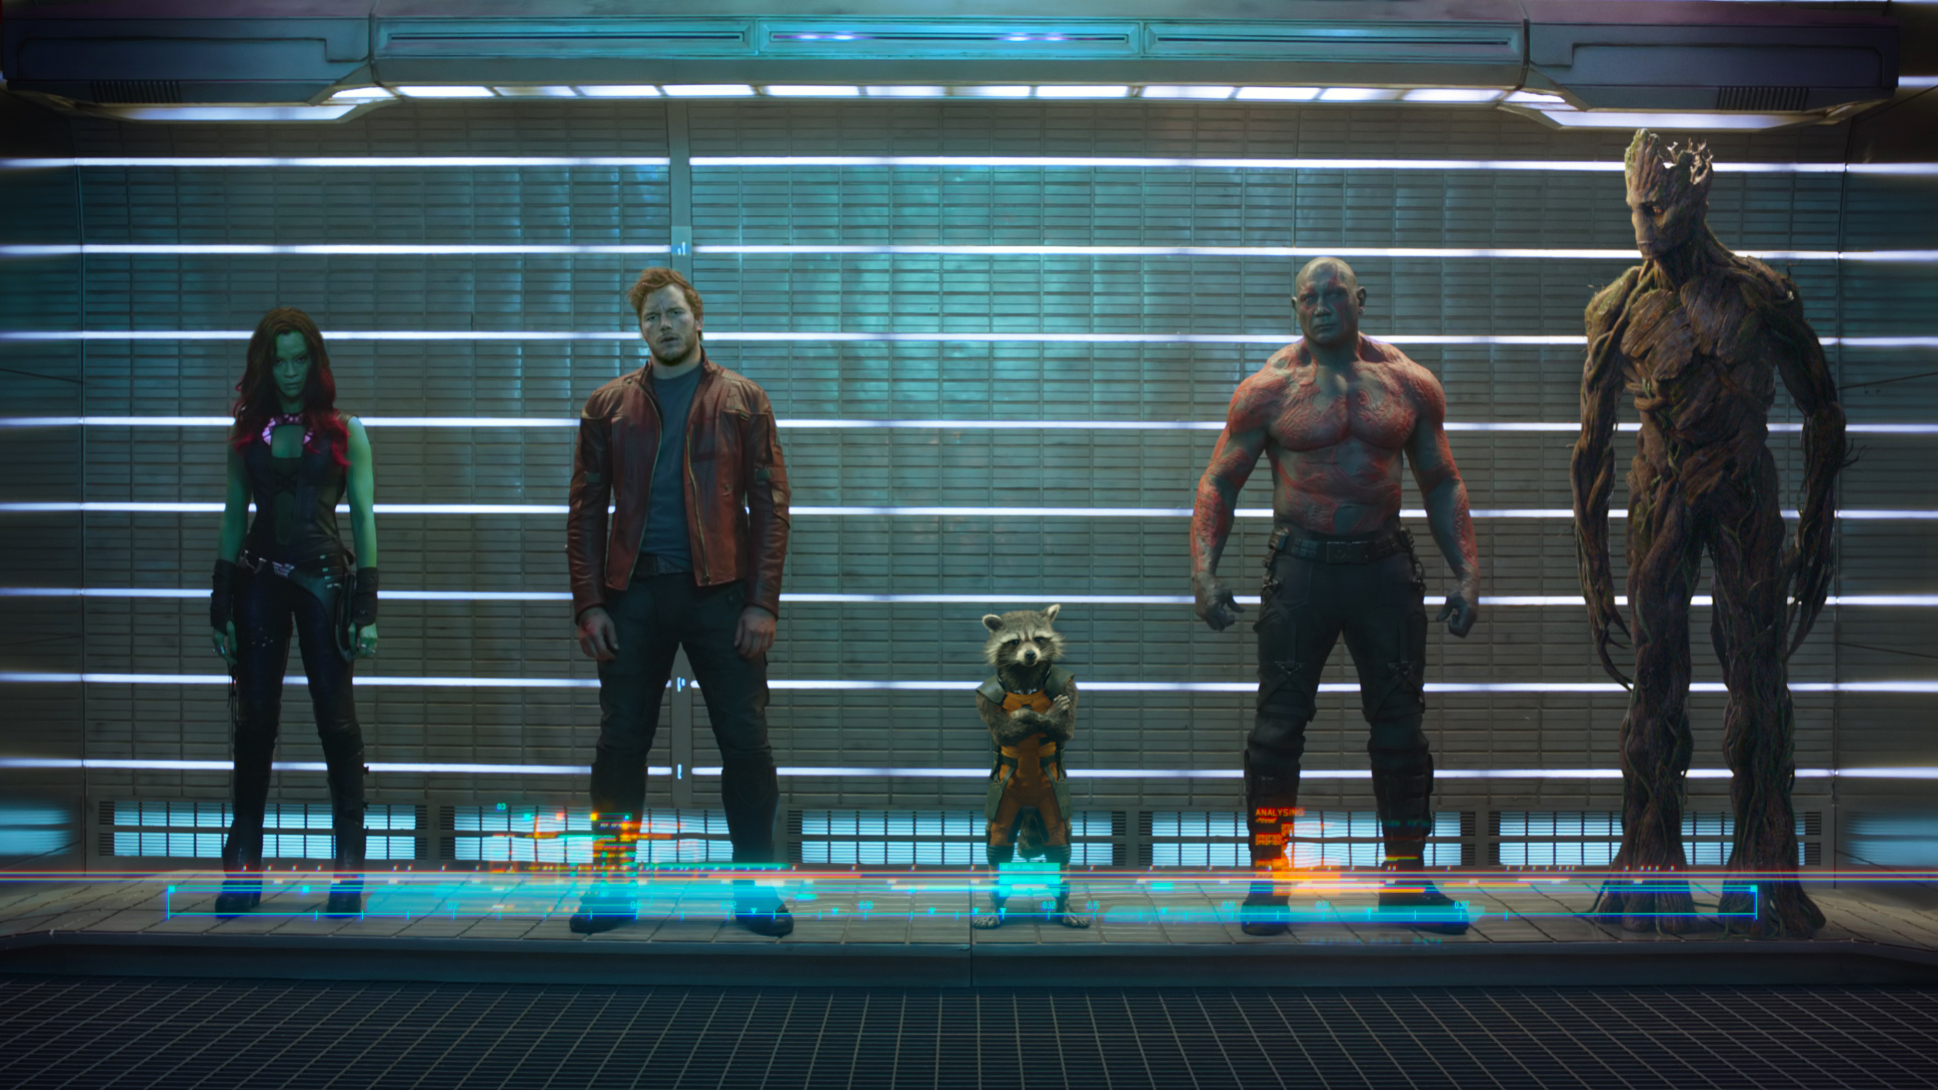 The Guardians of the Galaxy film snapshot